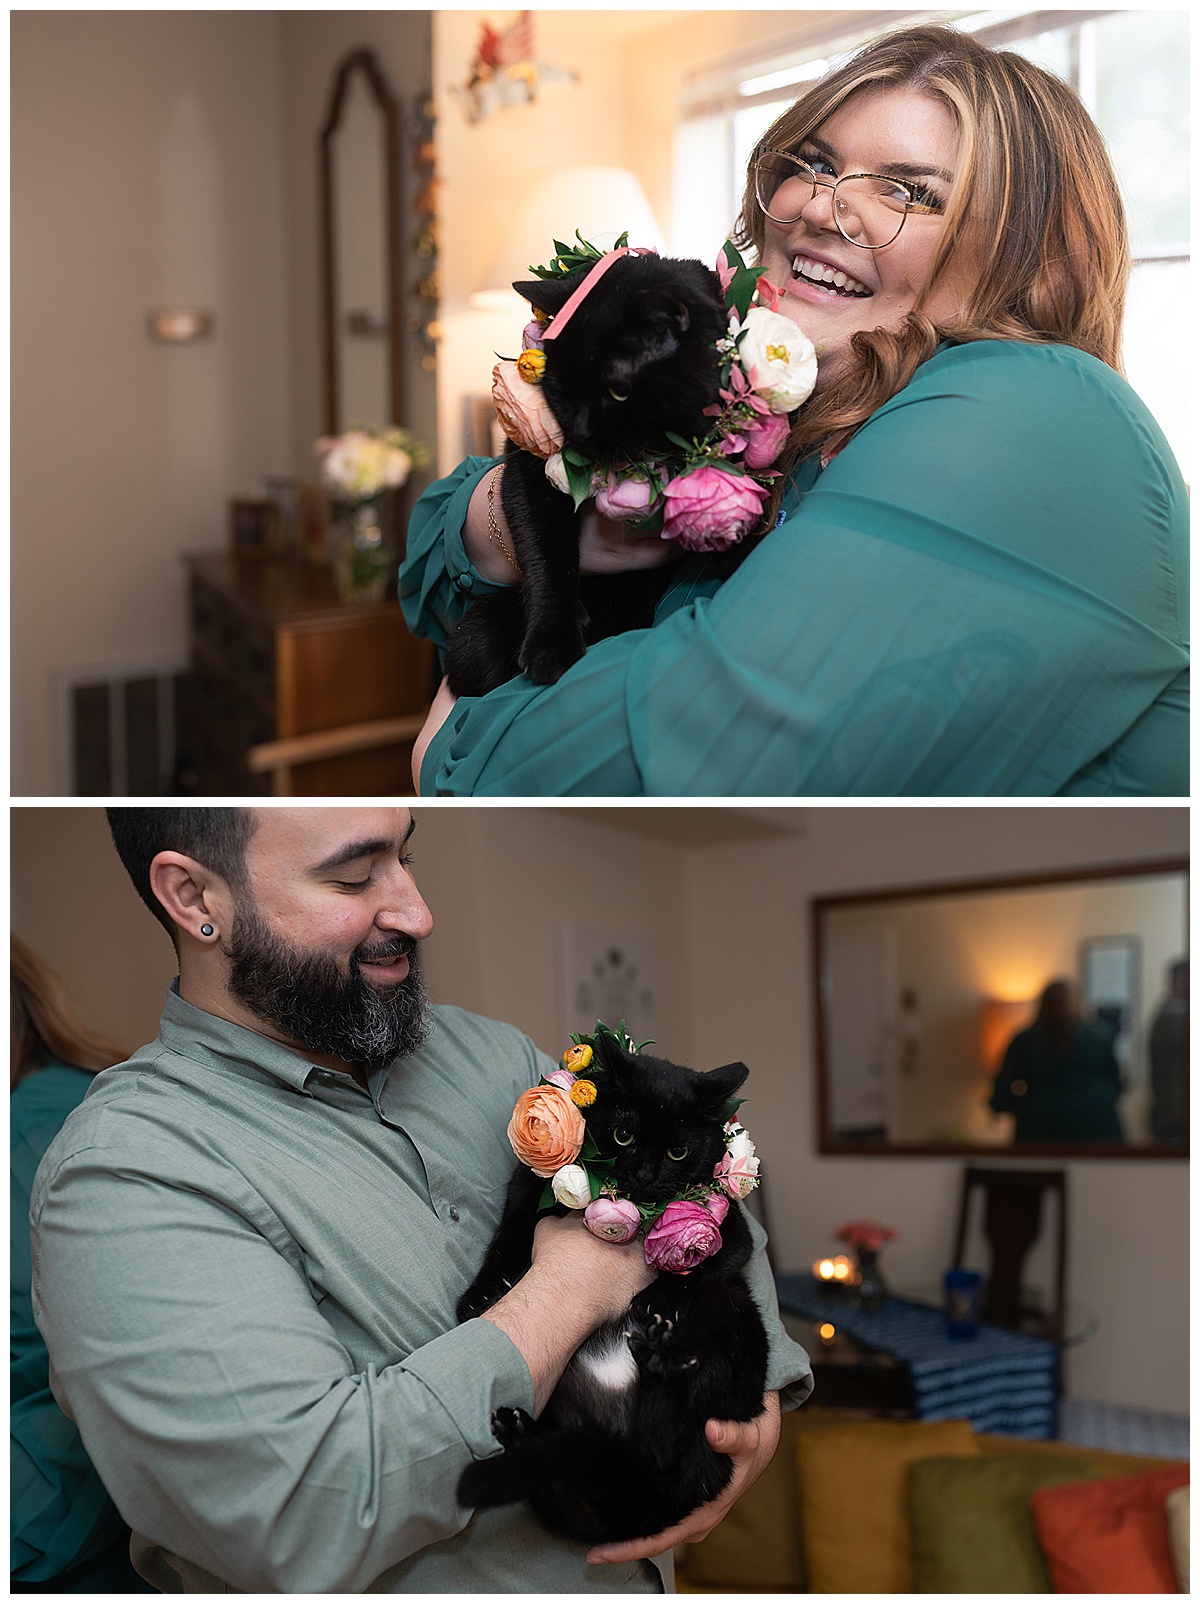 Man and woman smile with cats after Flower Vault Engagement